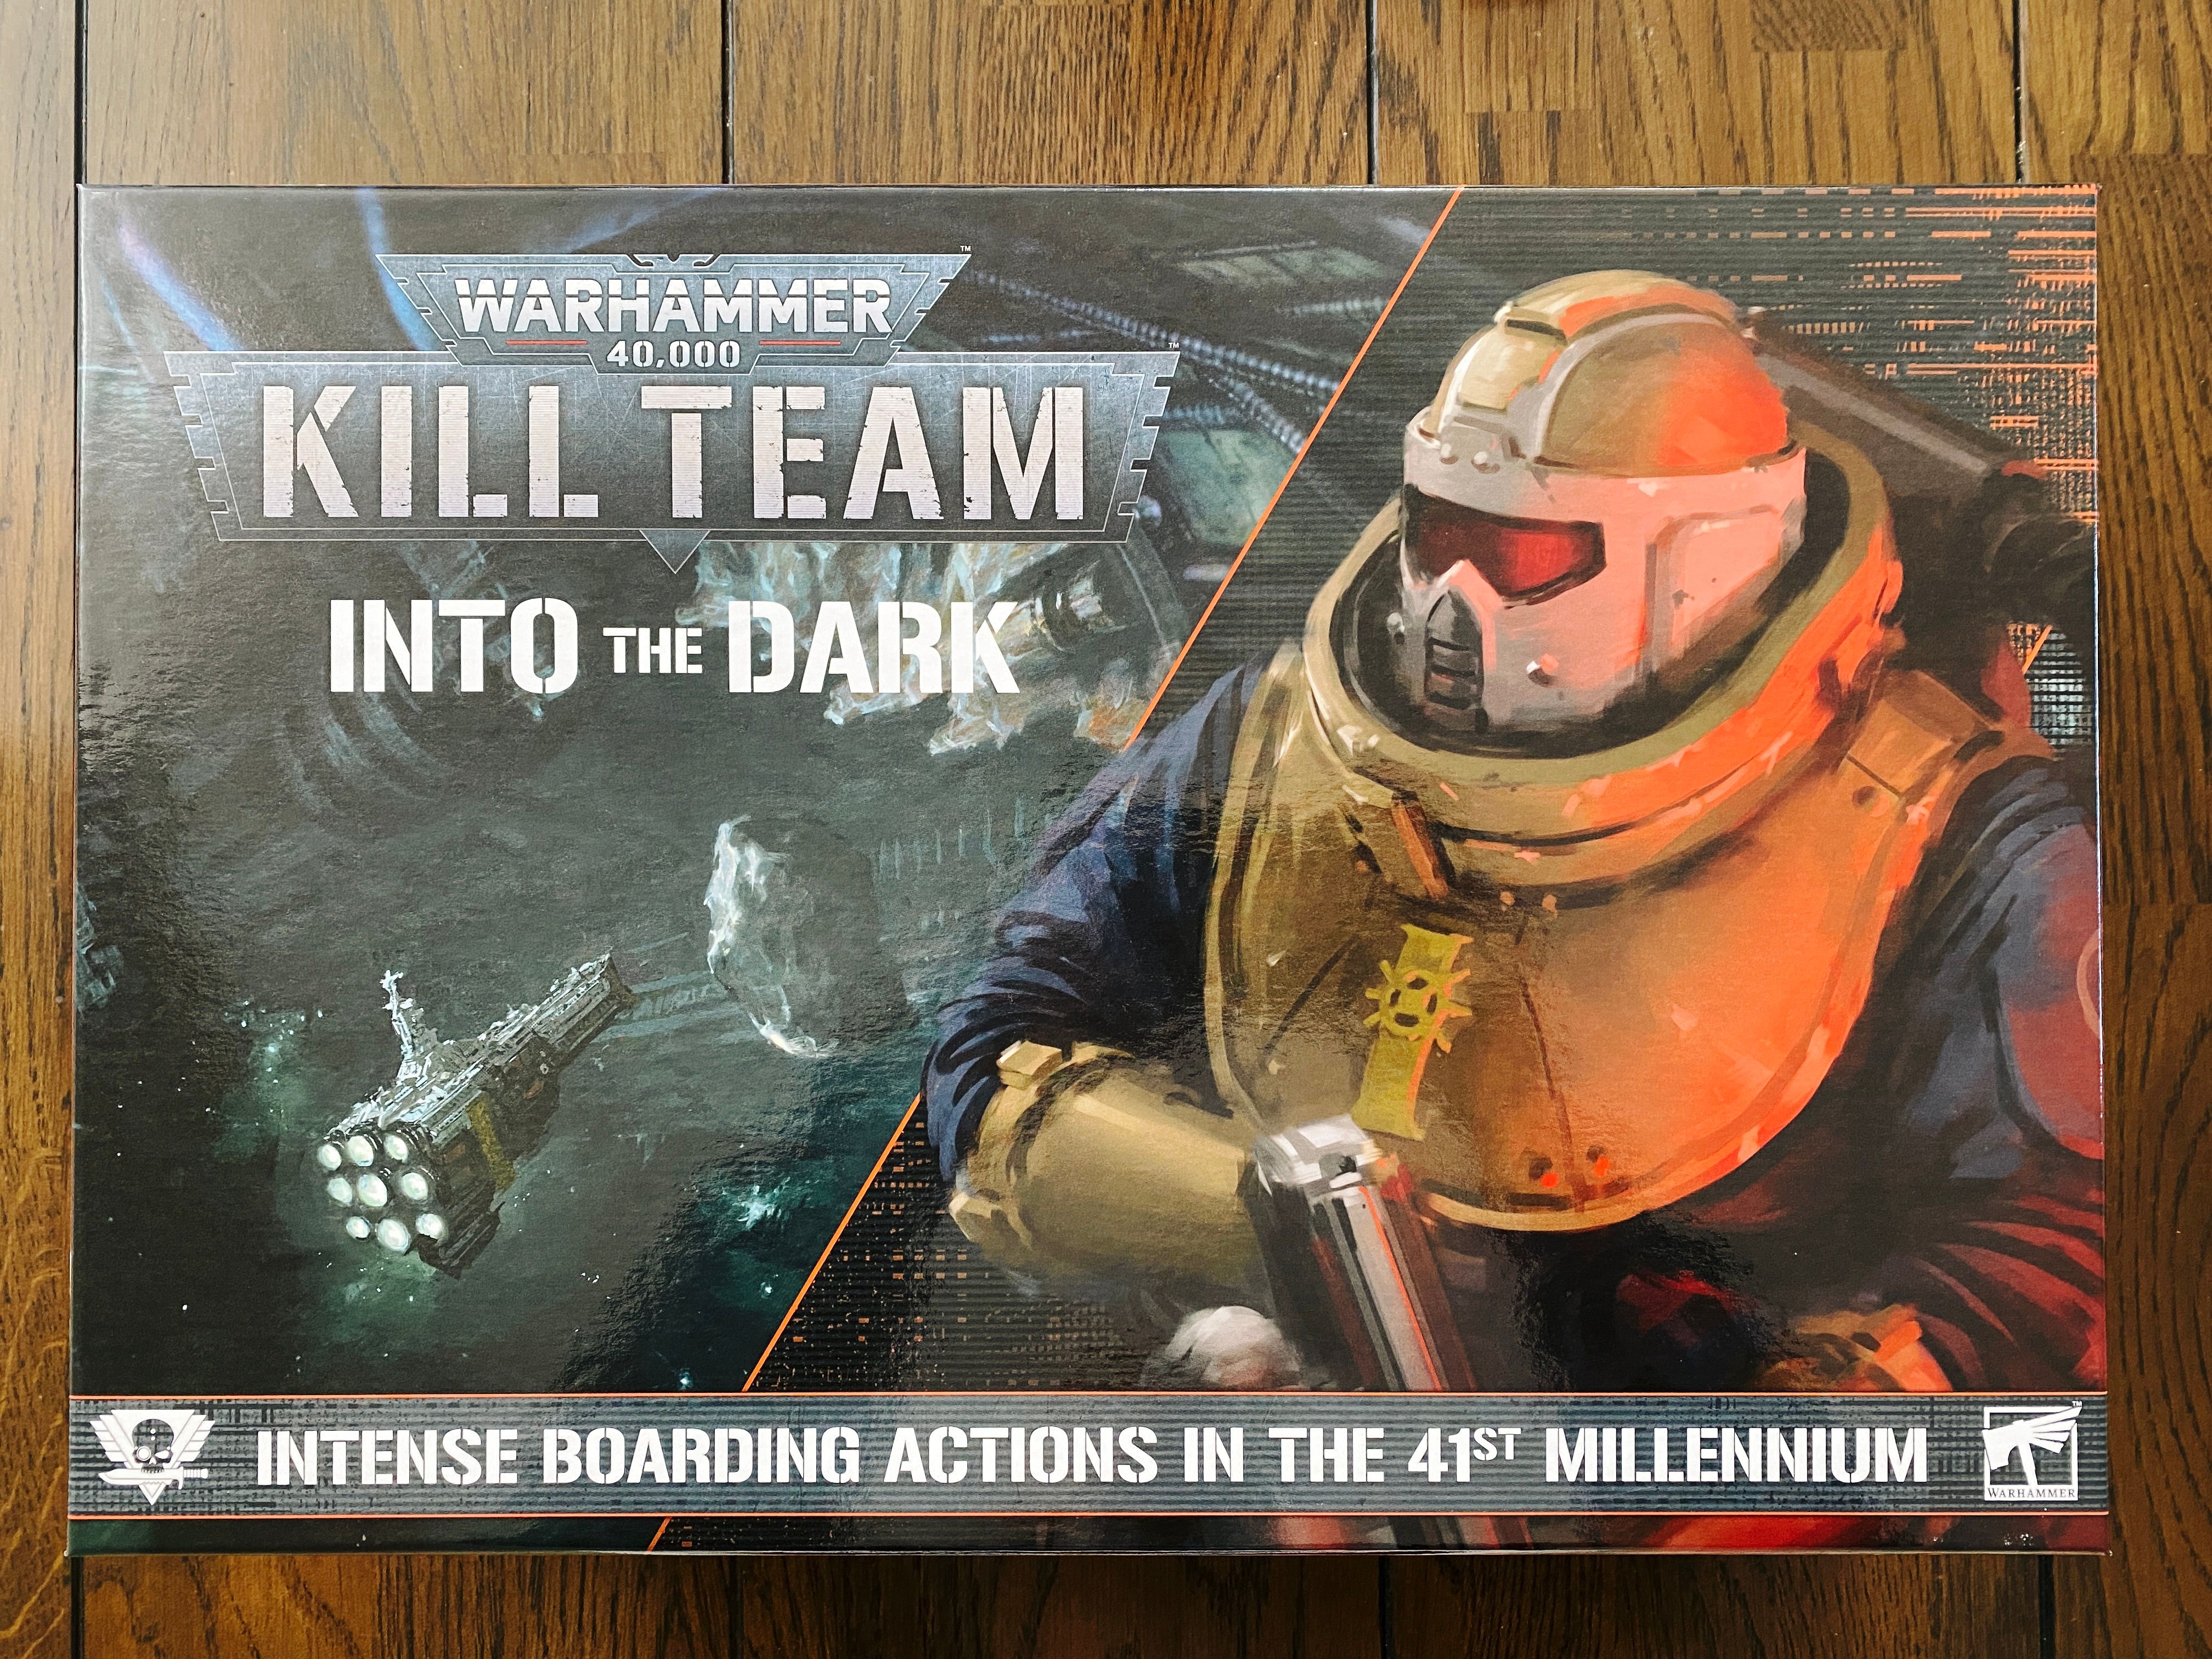 A photo of the (ENORMOUS) box of the new edition of Warhammer 40,000: Kill Team. The box art has a painting of a huge cathedral-like starship floating in the depths of space on the left-hand side, and on the right is a heavily armed and armoured guy in a chonky helmet holding what looks like a beefy shotgun. The tagline for this is "Intense boarding actions in the 41st millennium."